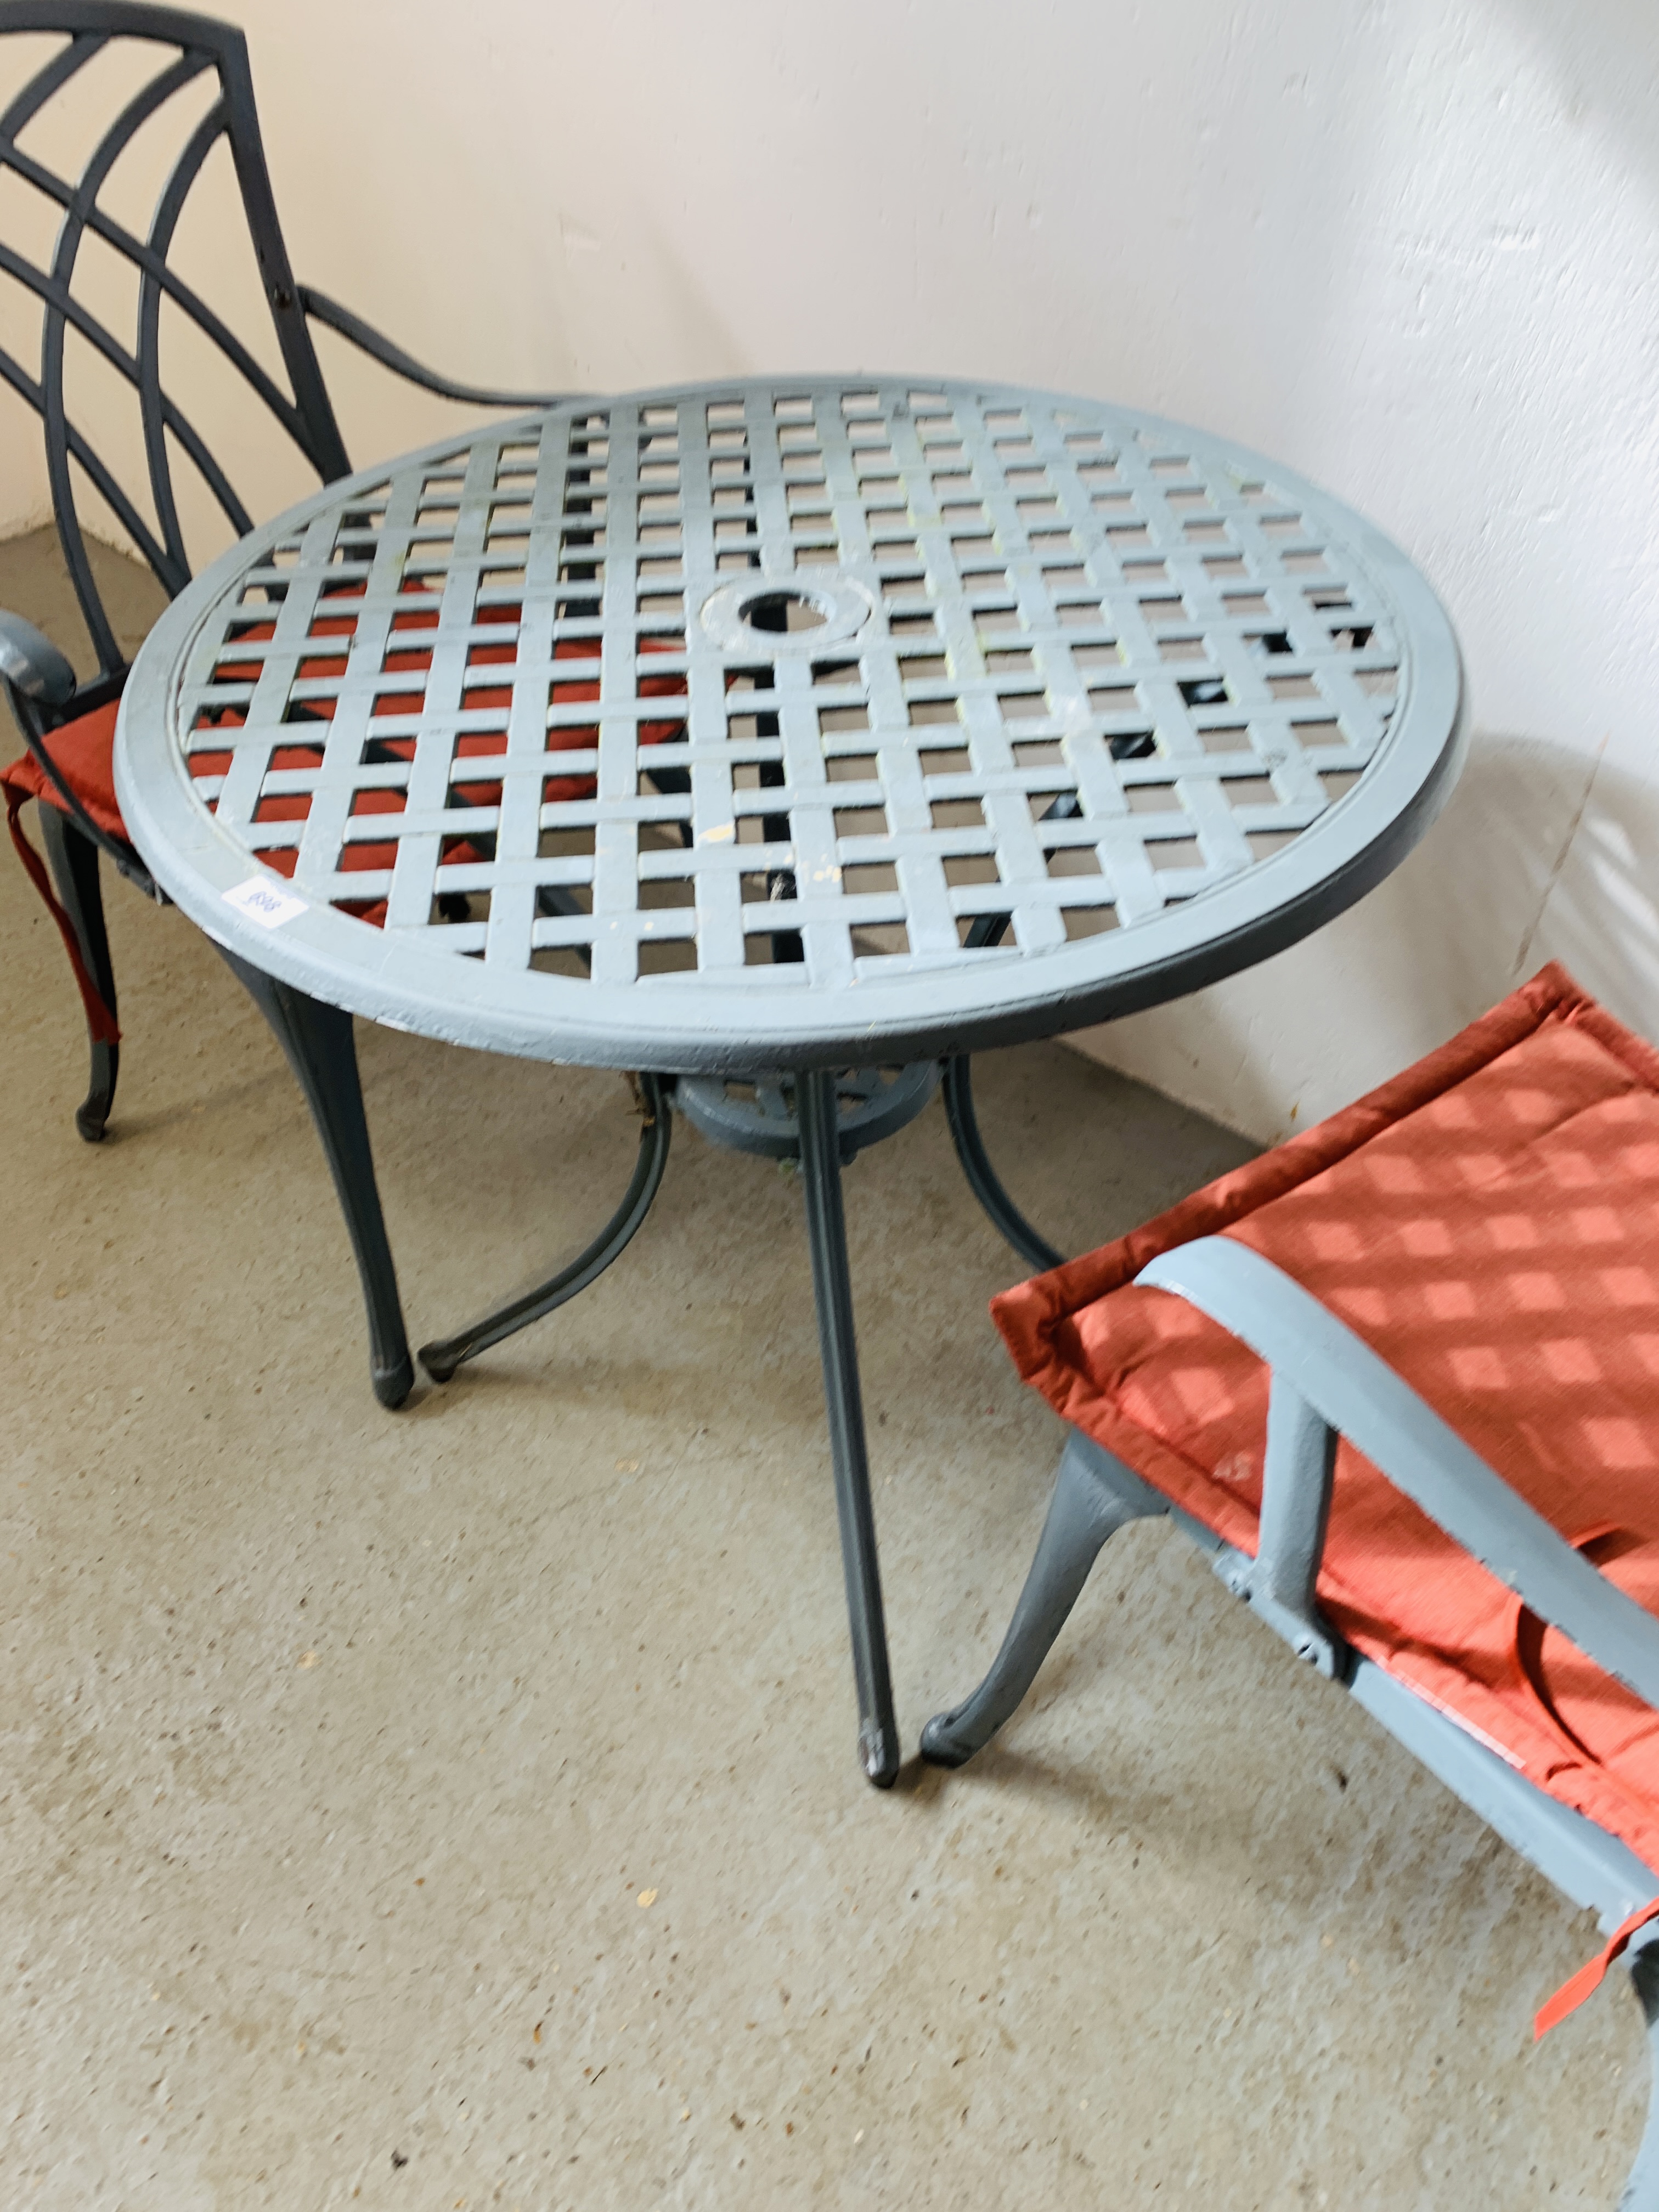 A CAST ALUMINIUM PATIO BISTRO SET COMPRISING CIRCULAR TABLE AND TWO CHAIRS WITH SEAT CUSHIONS - Image 4 of 6